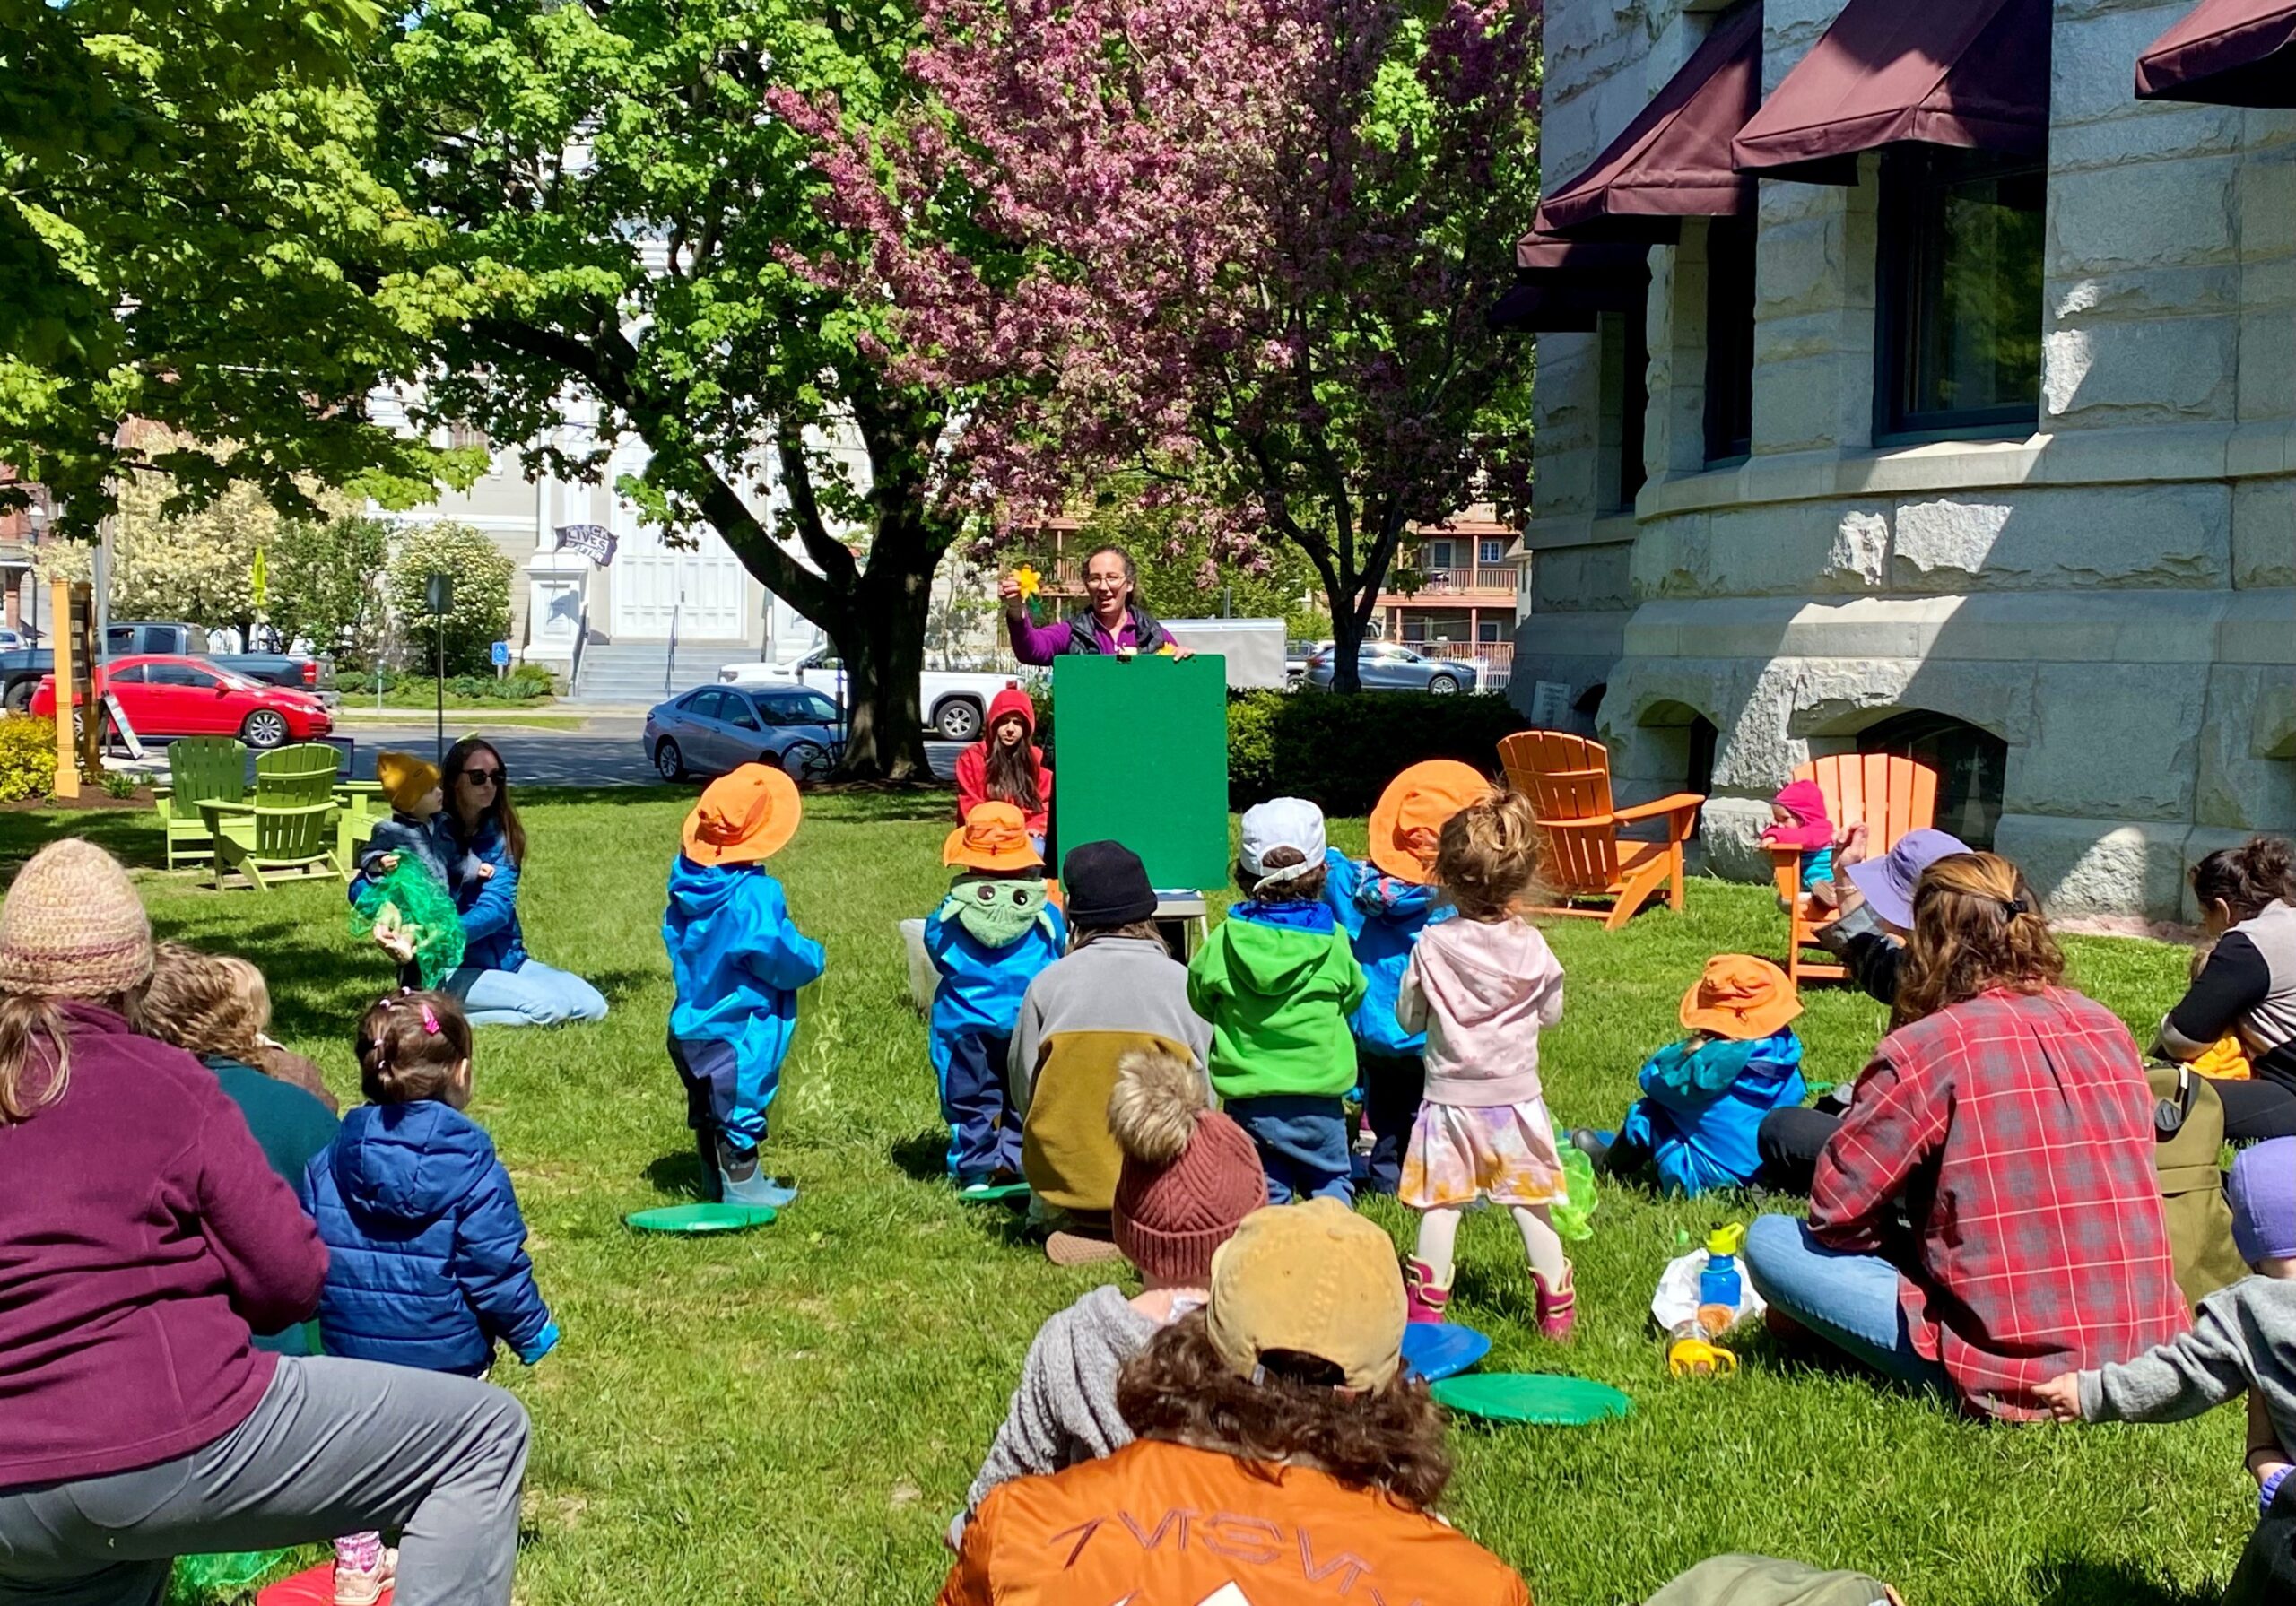 Librarian leading an outdoor storytime for children